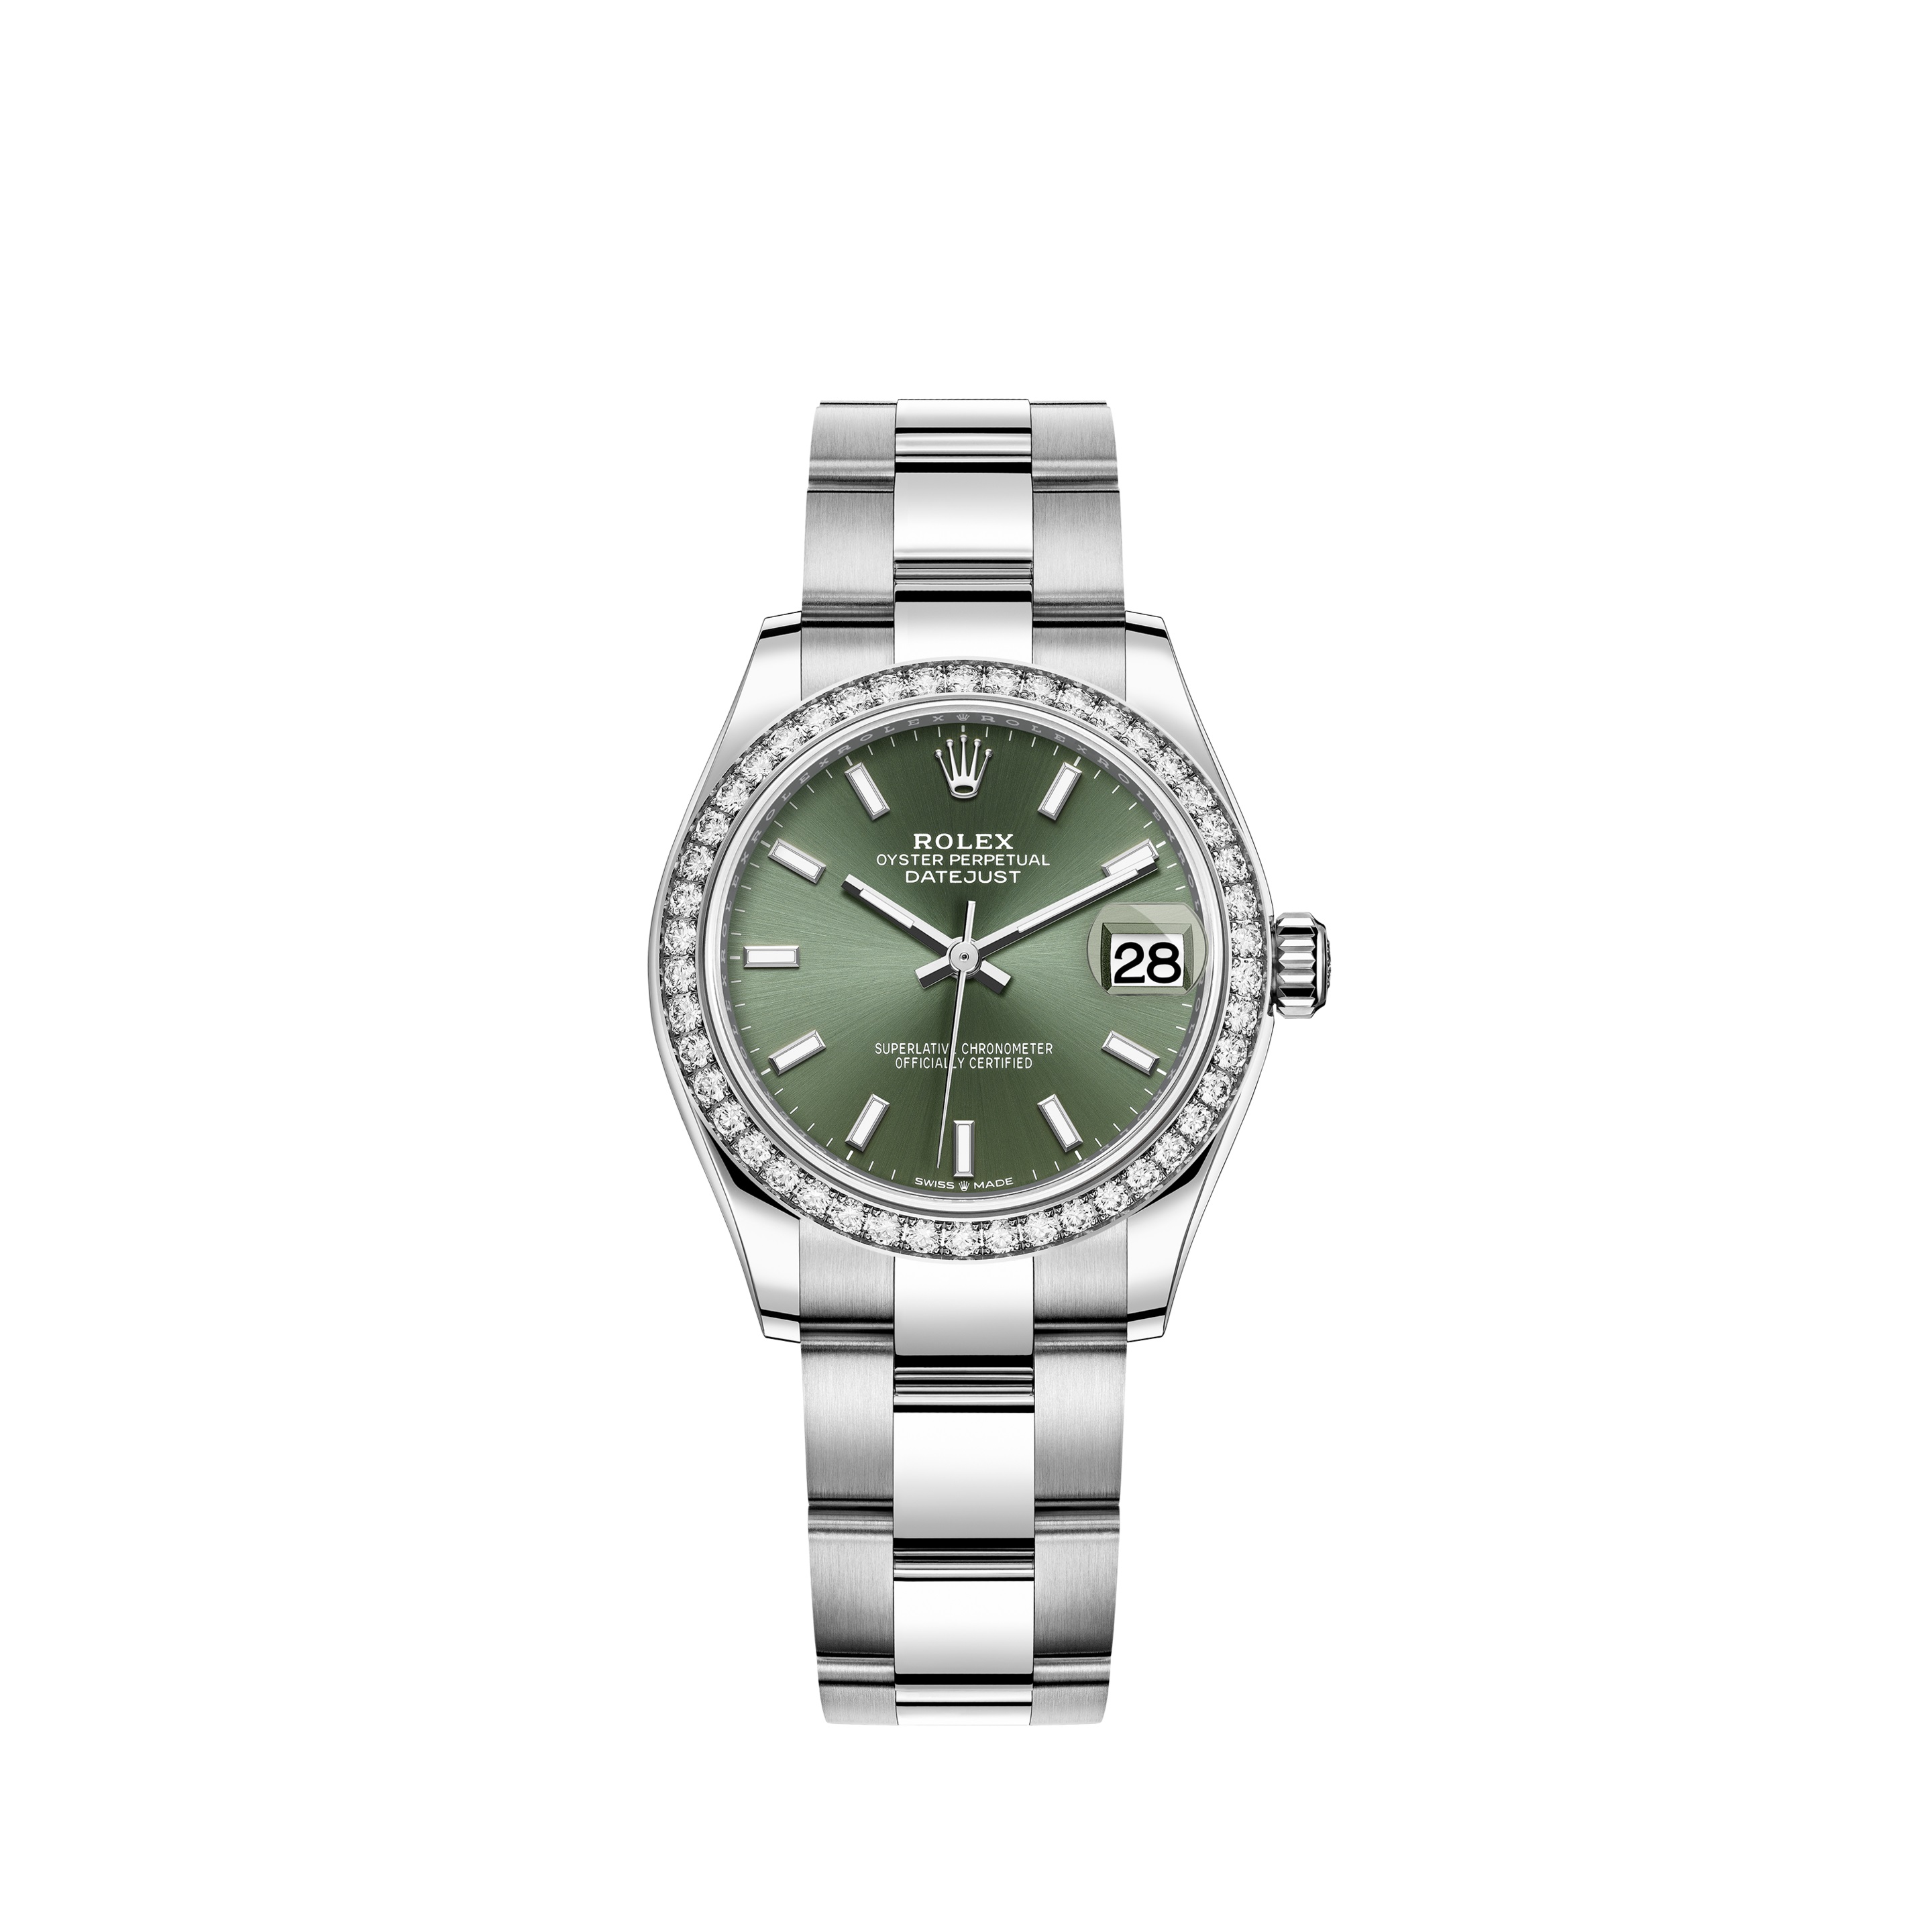 Datejust 31 278384RBR White Gold & Stainless Steel Watch (Mint Green) - Click Image to Close